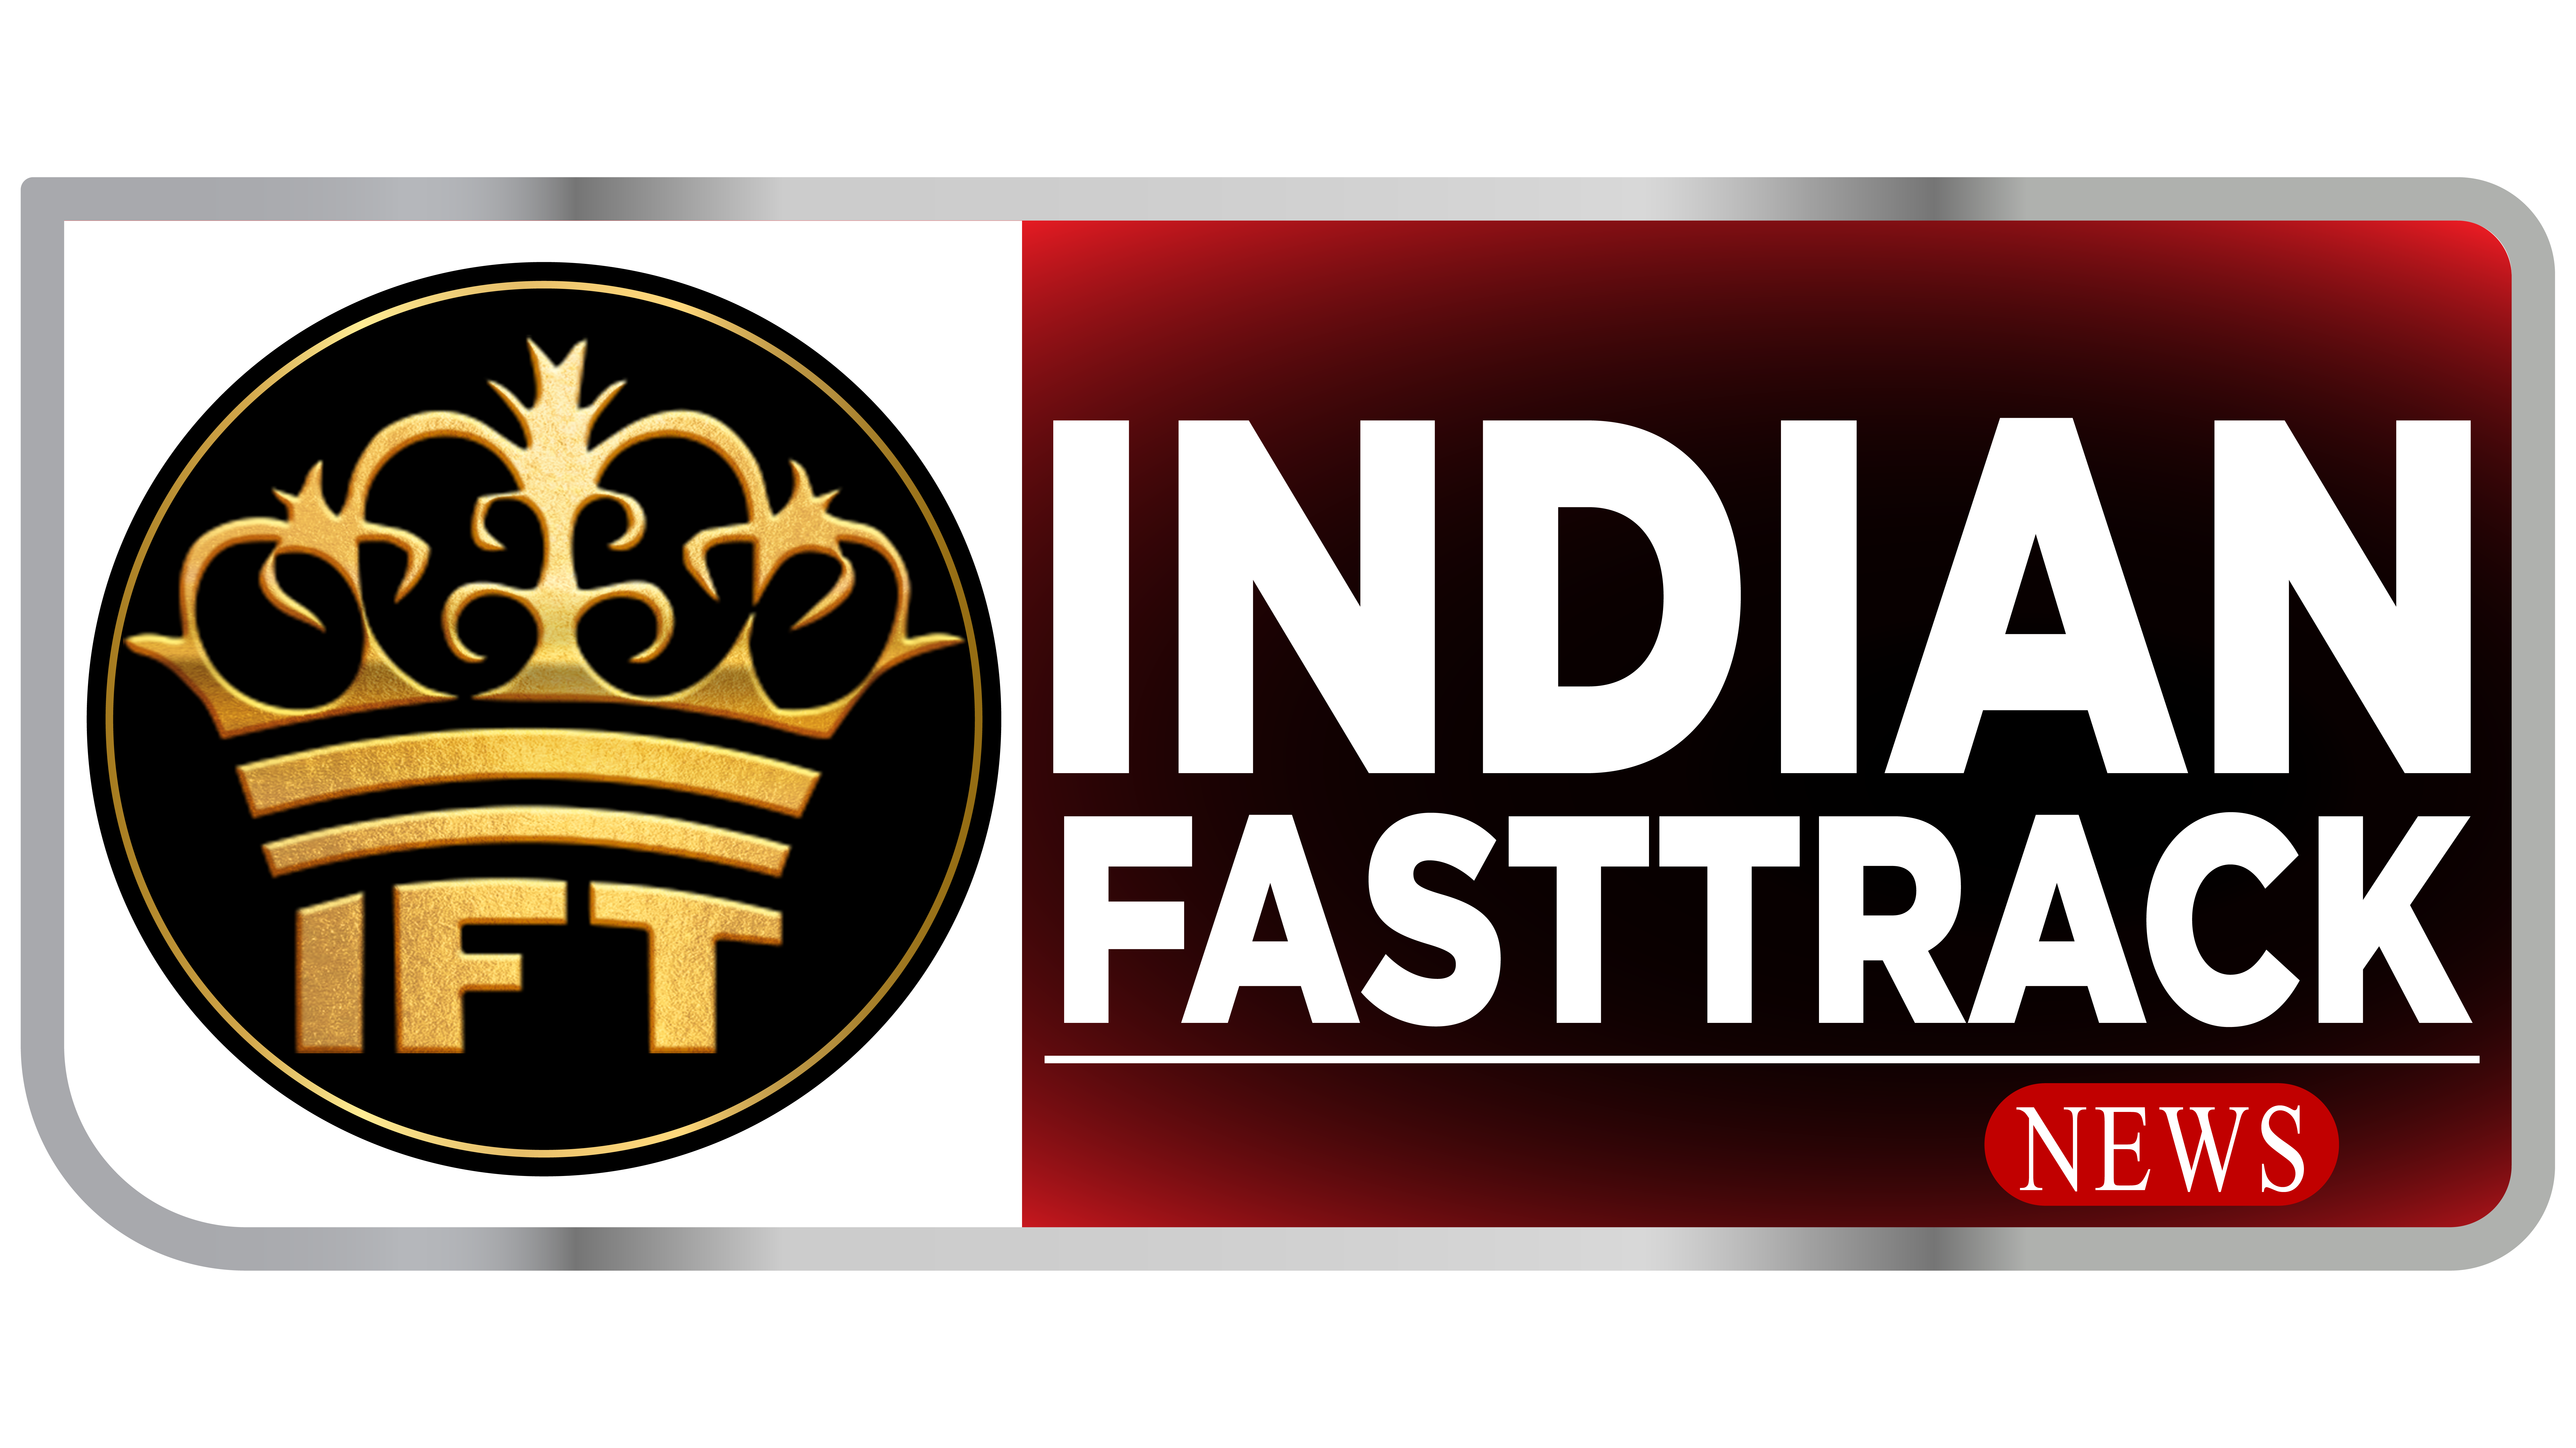 Indian Fasttrack (Electronic Media)